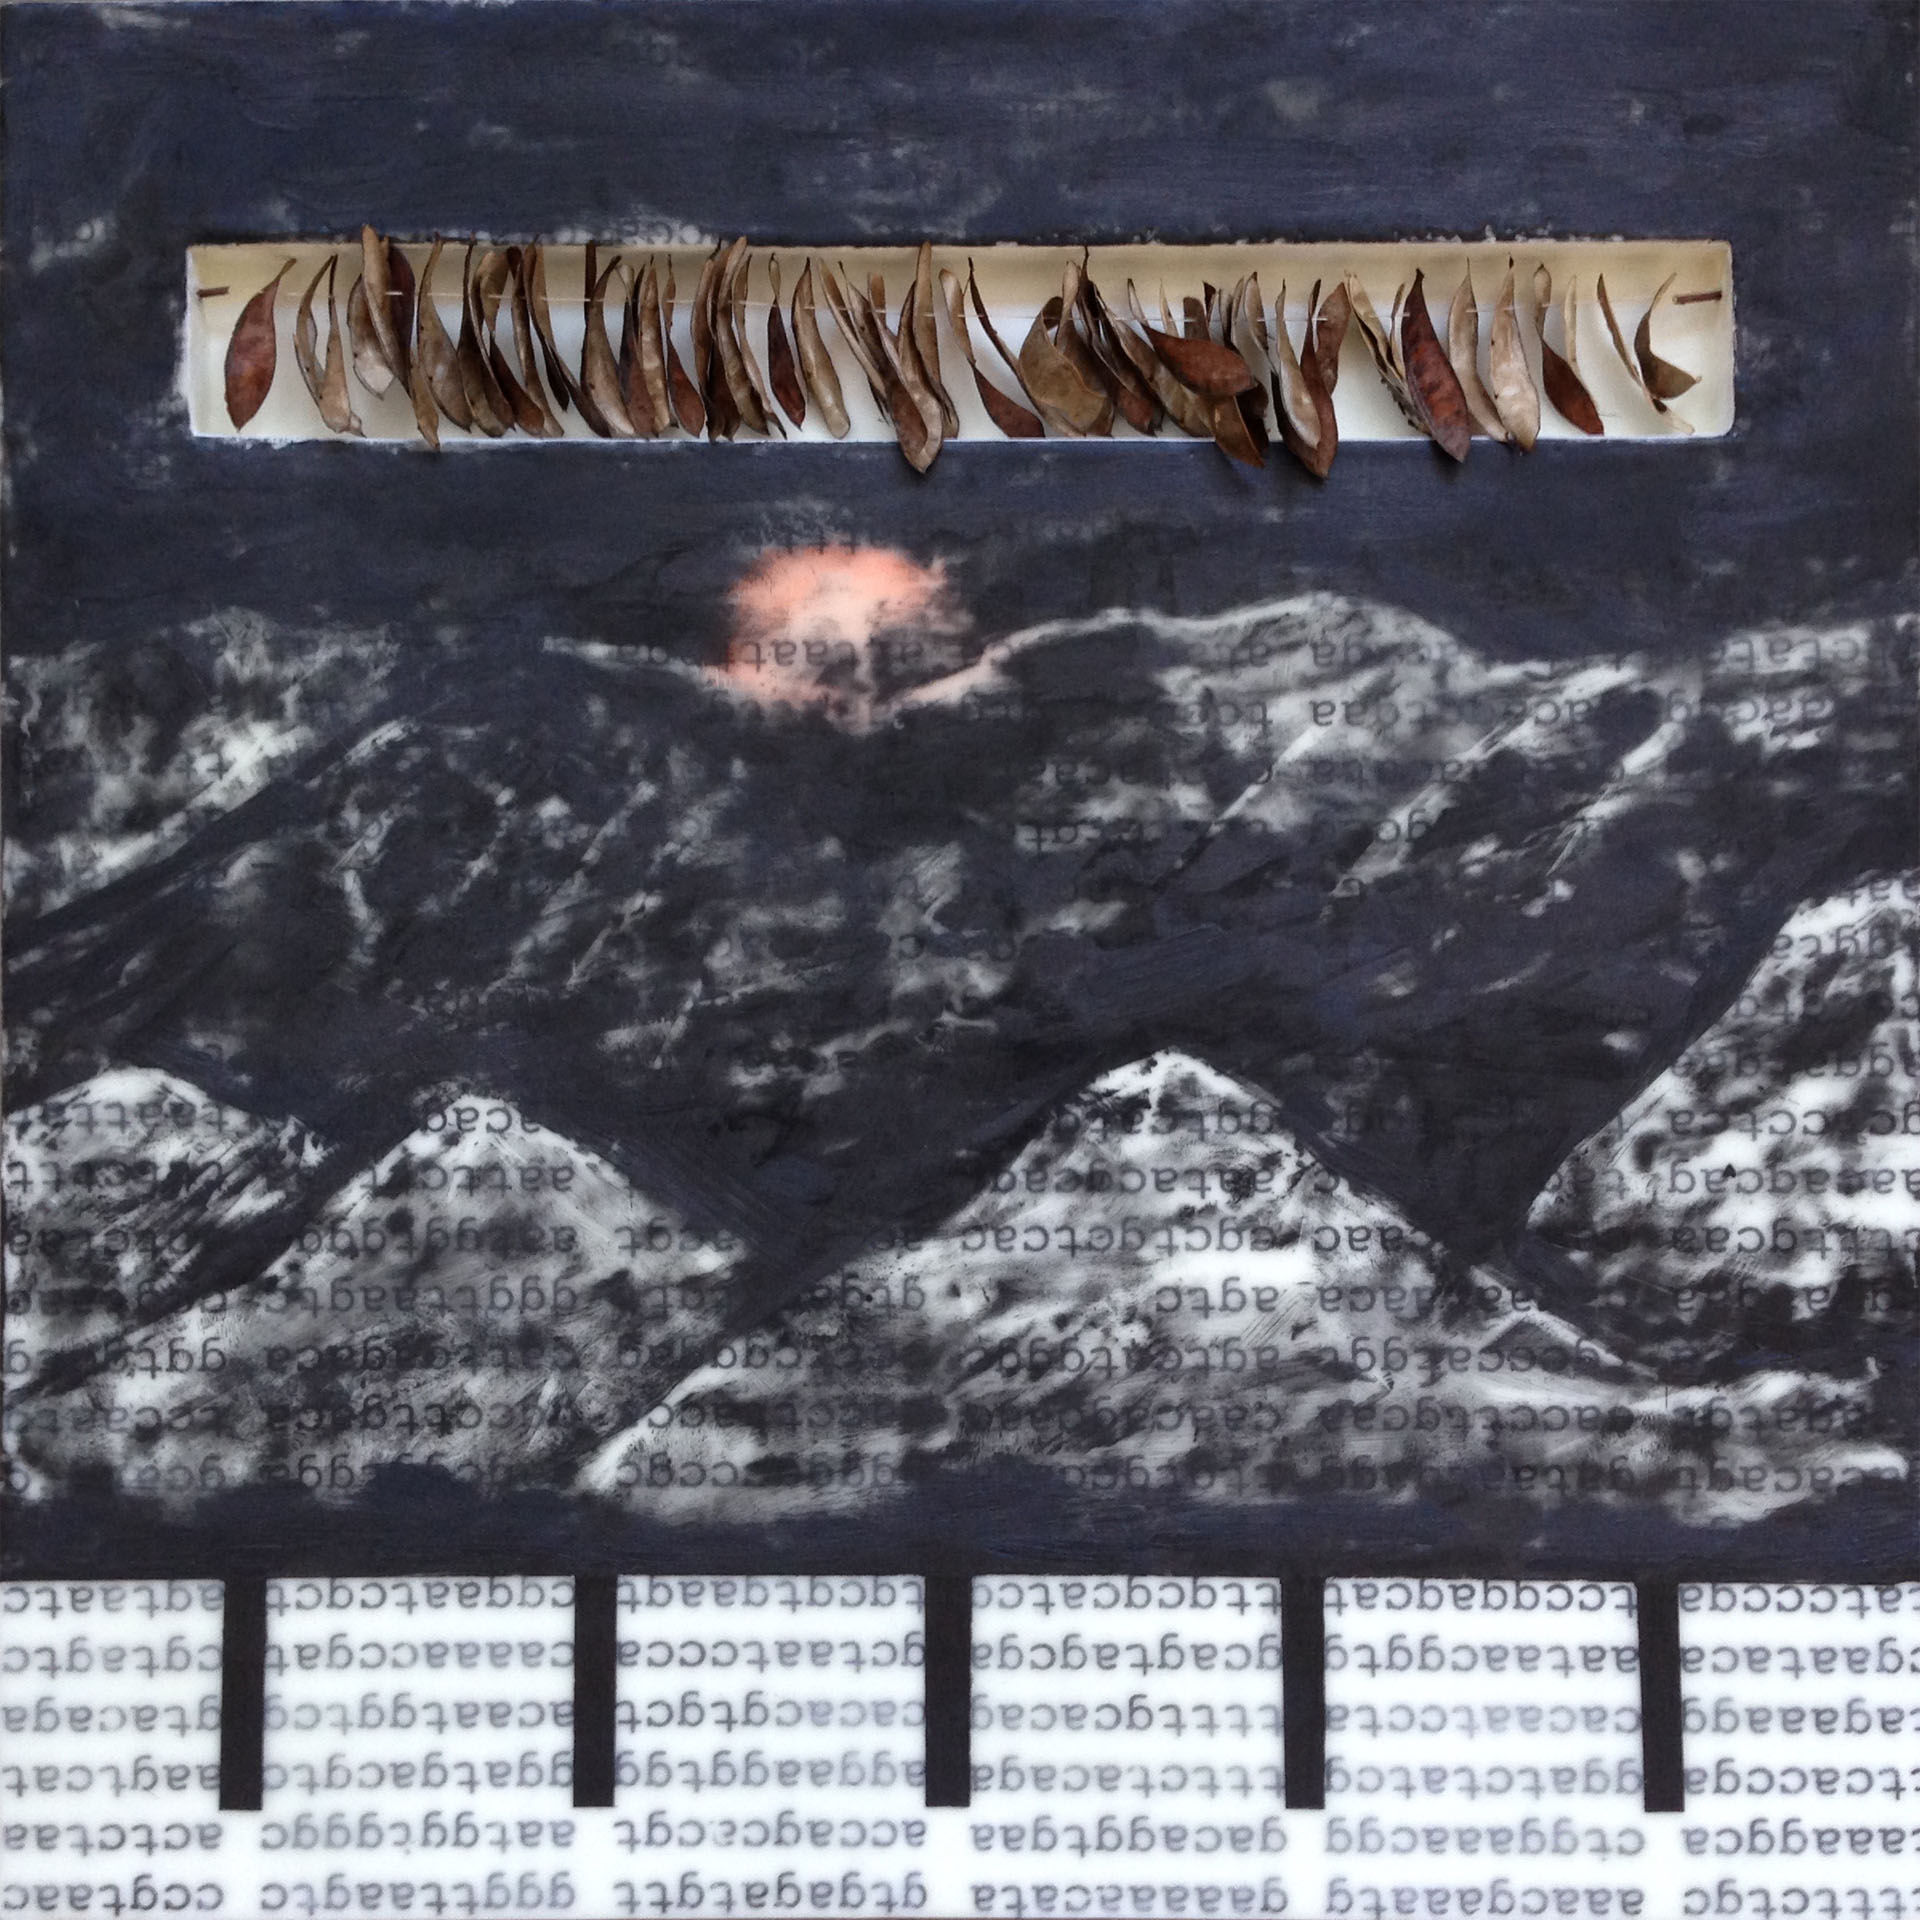   Intervention (Part 2,)&nbsp; encaustic and mixed media on braced wood panel, 20x20 